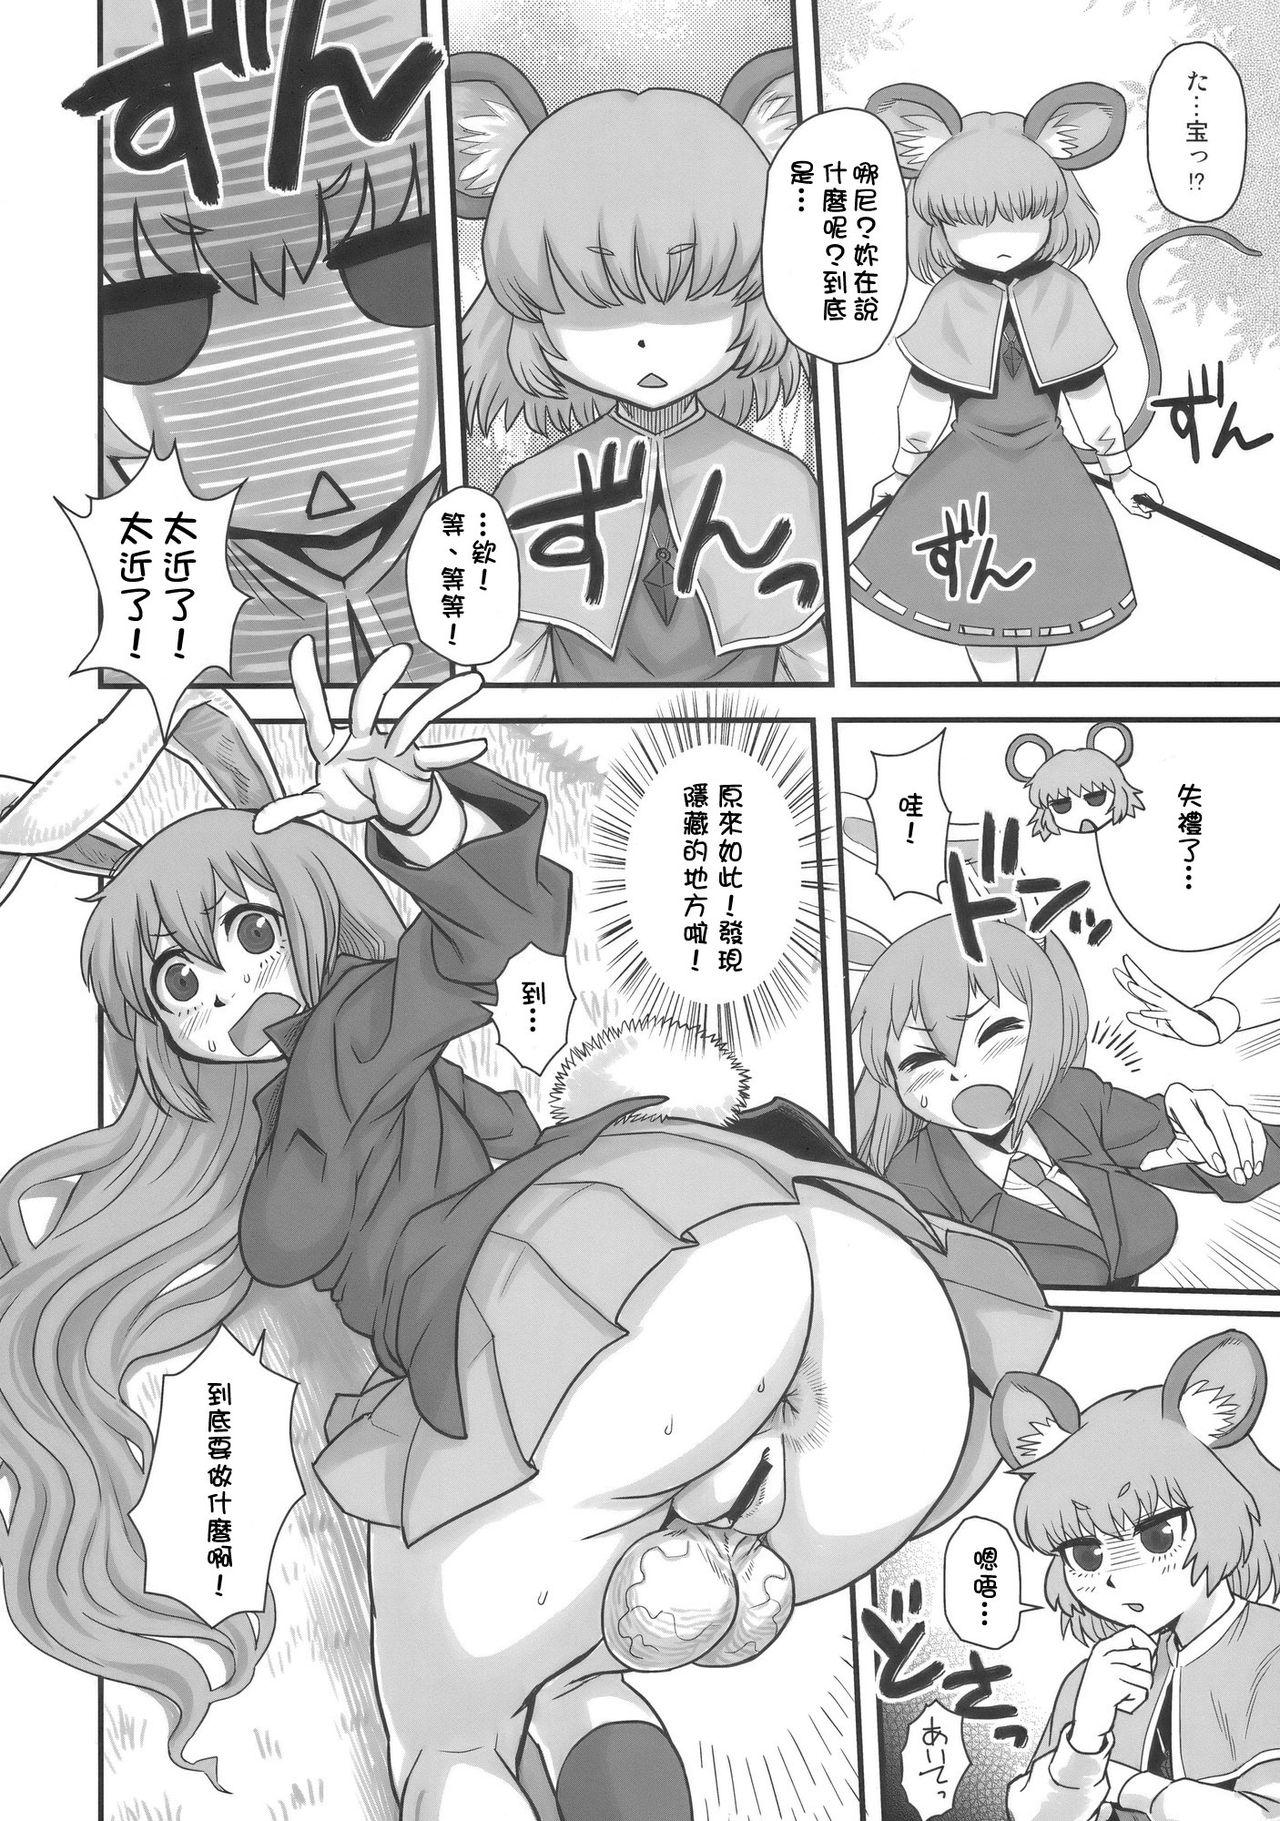 Behind Lunatic Udon - Touhou project Gay Skinny - Page 6